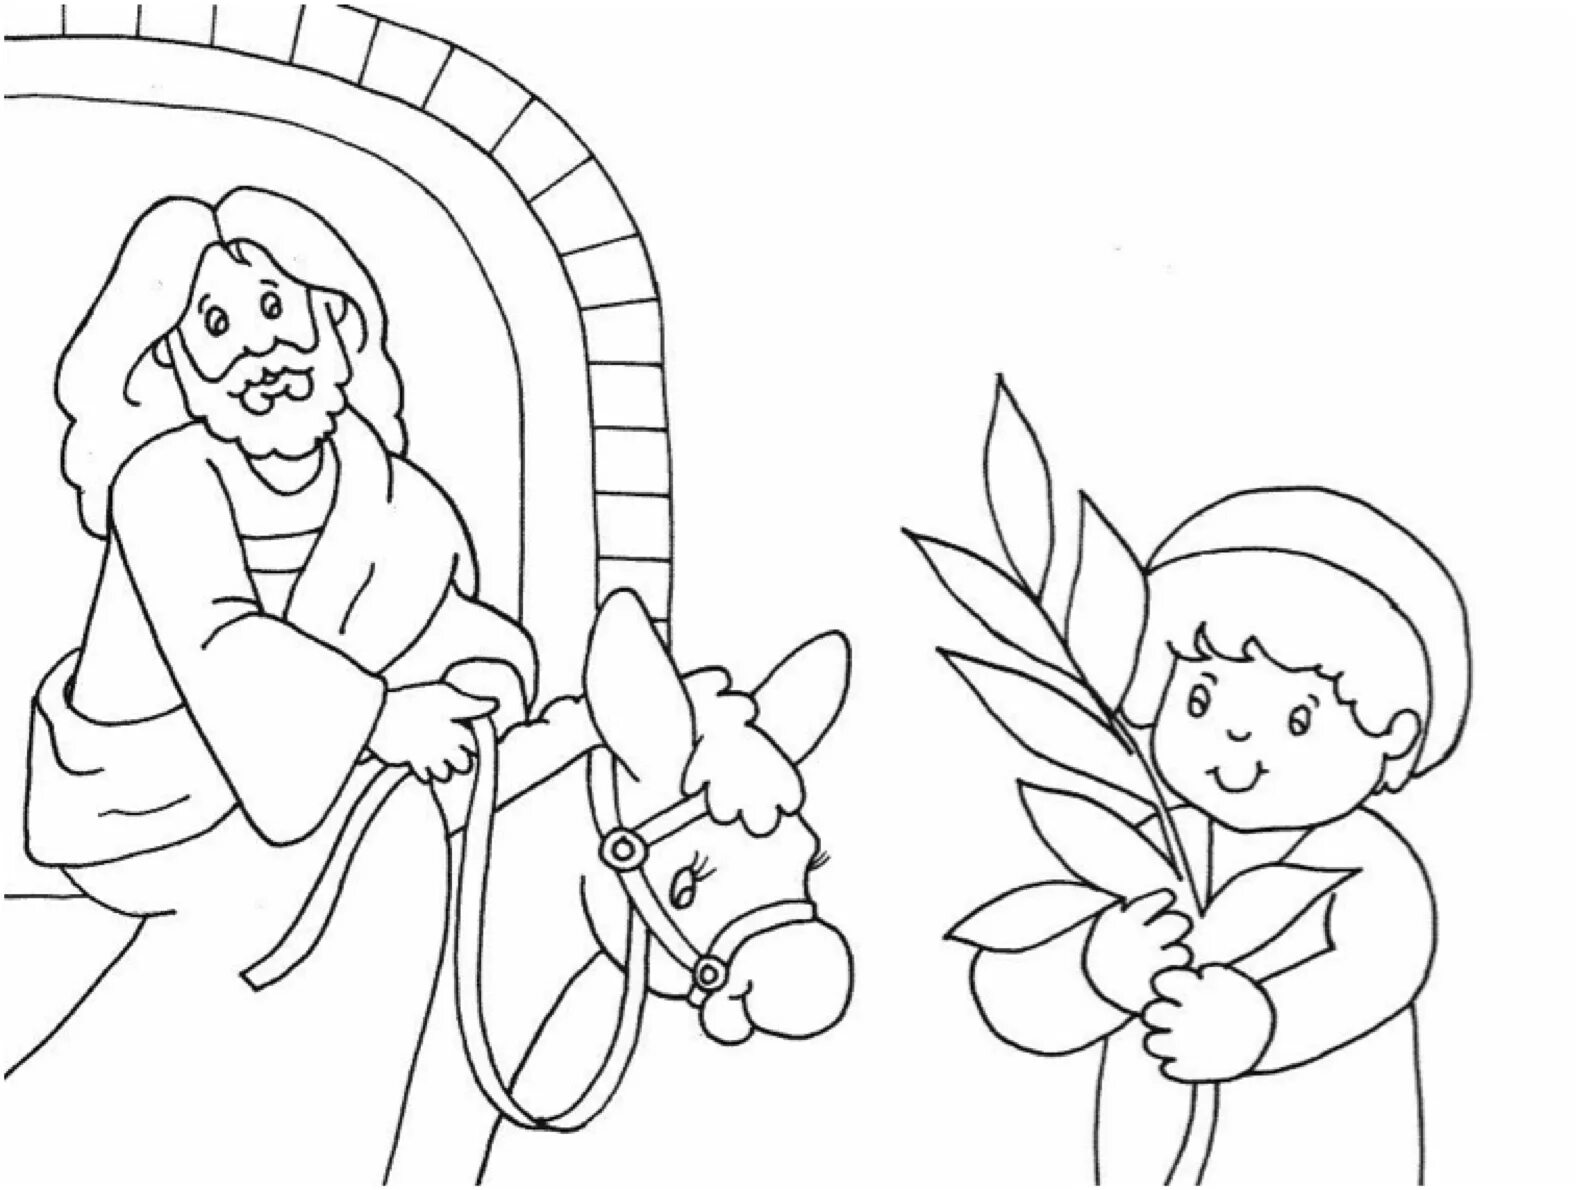 Glowing christian coloring book for kids